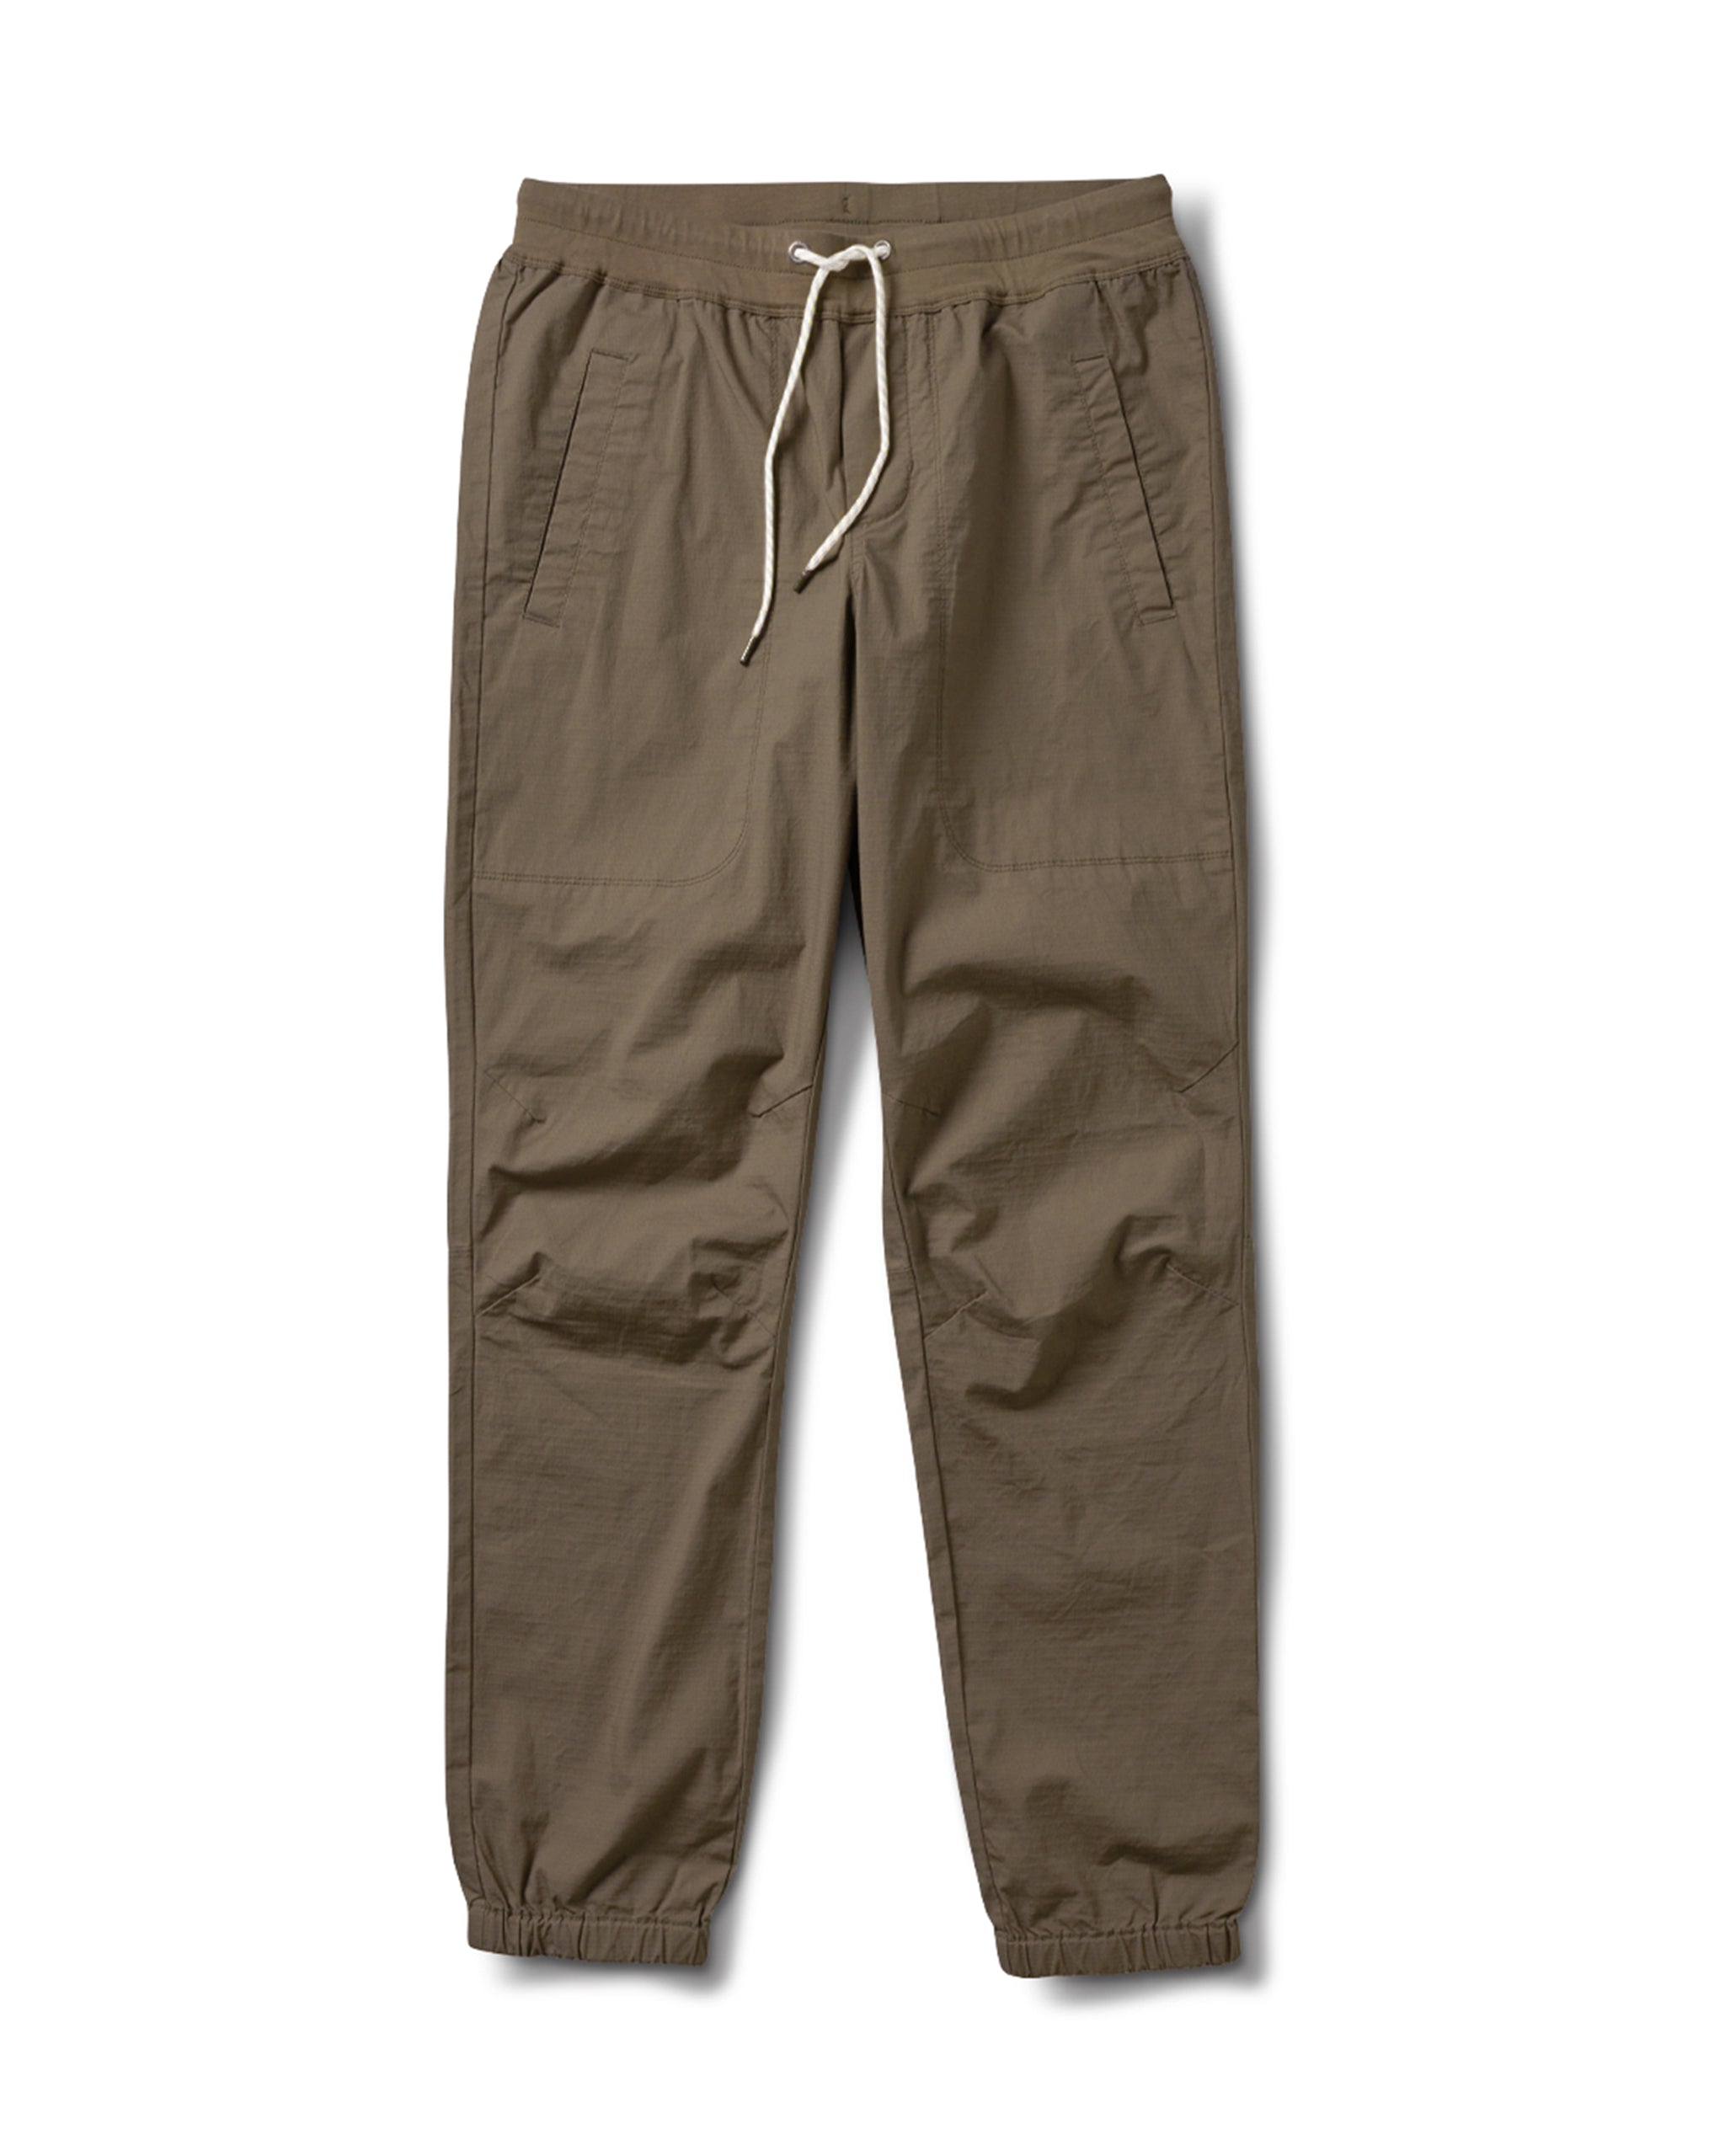 Southpole Young Men's Basic Stretch Twill Jogger Pants Pants